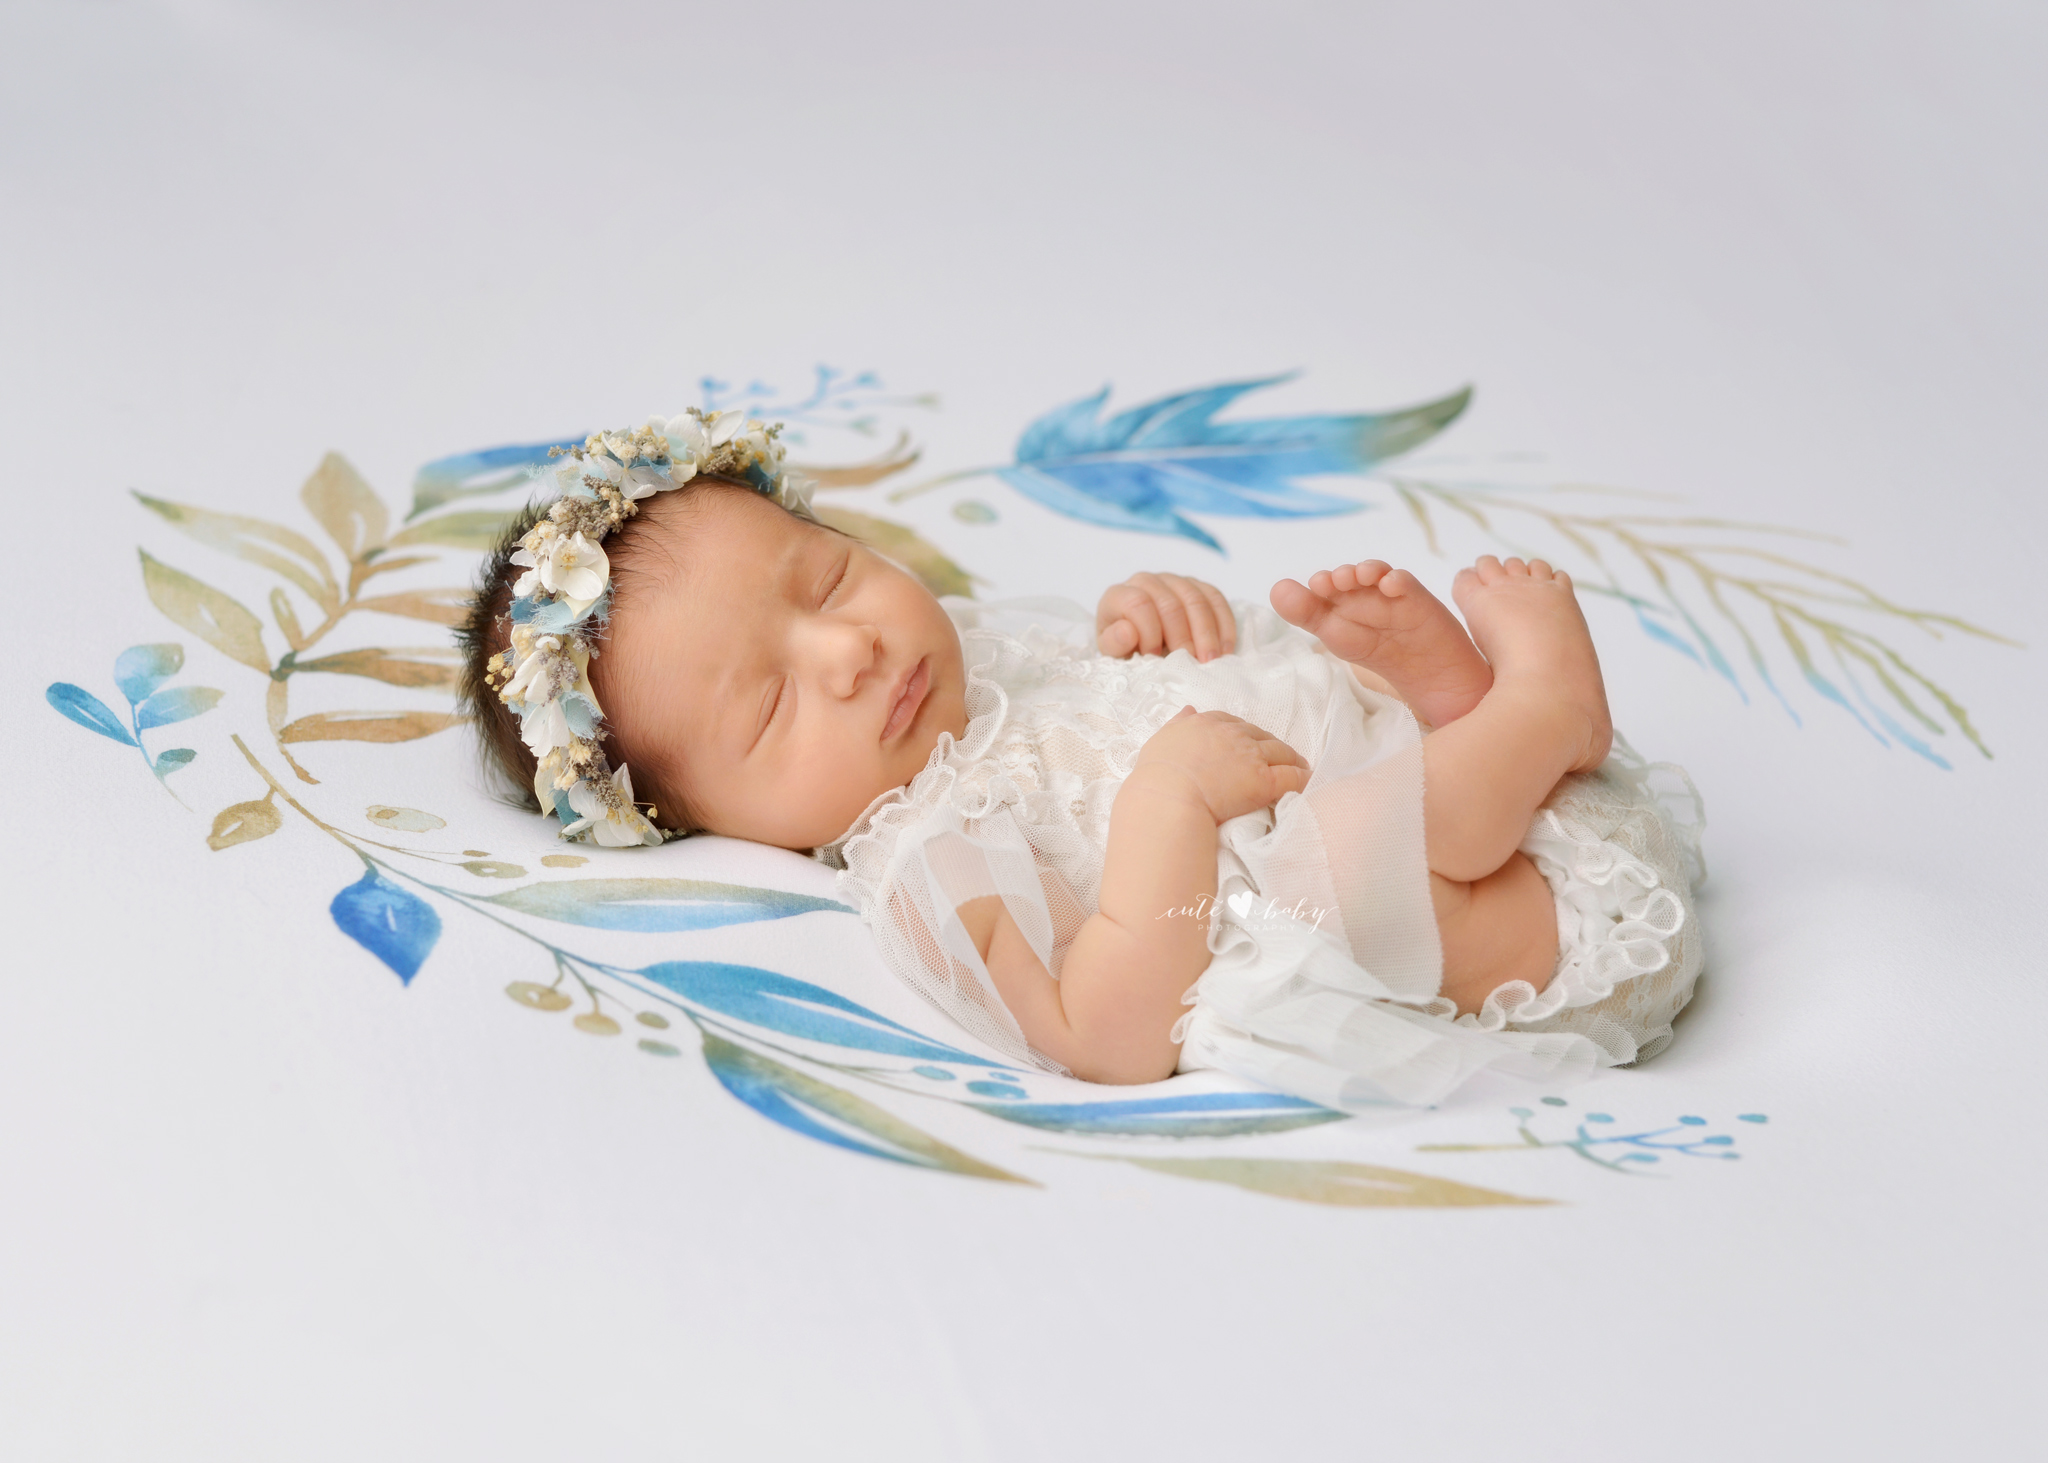 Newborn Photography Manchester by Cute Baby Photography, Newborn photography studio Greater Manchester, Baby Photography, Newborn Session Manchester